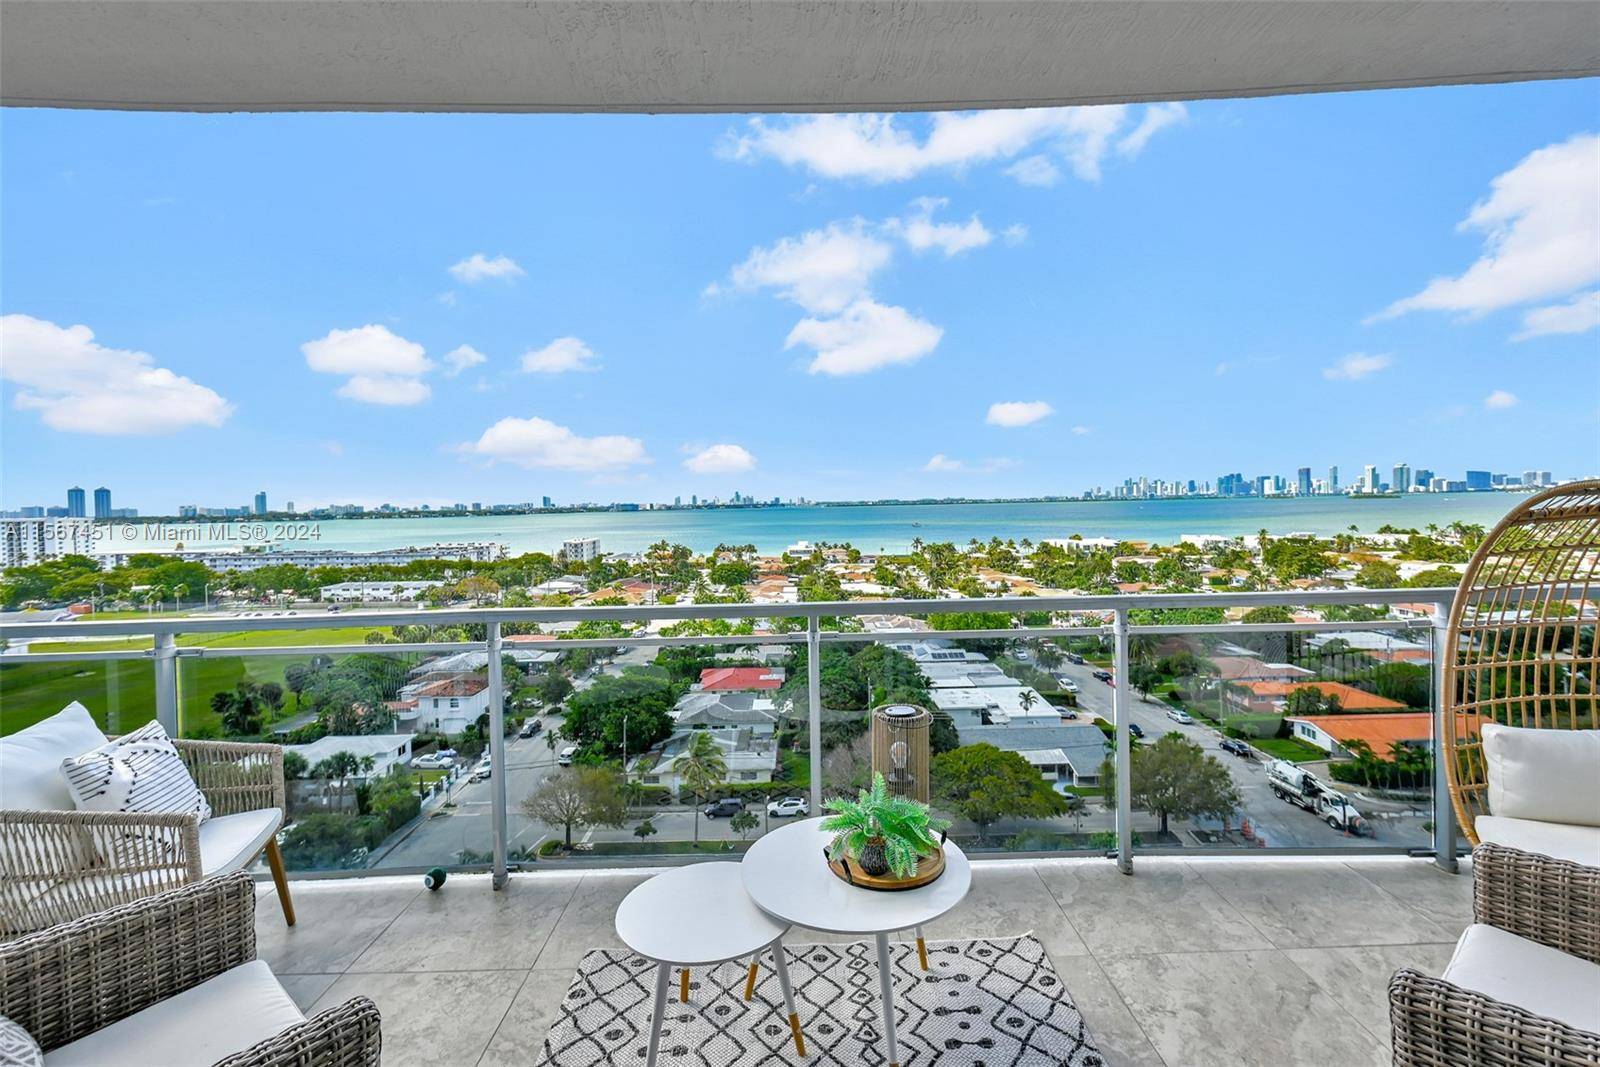 Opportunity to own a 2 bedroom den with 10 ft ceilings, impact windows and one of the best city bay views of Miami.